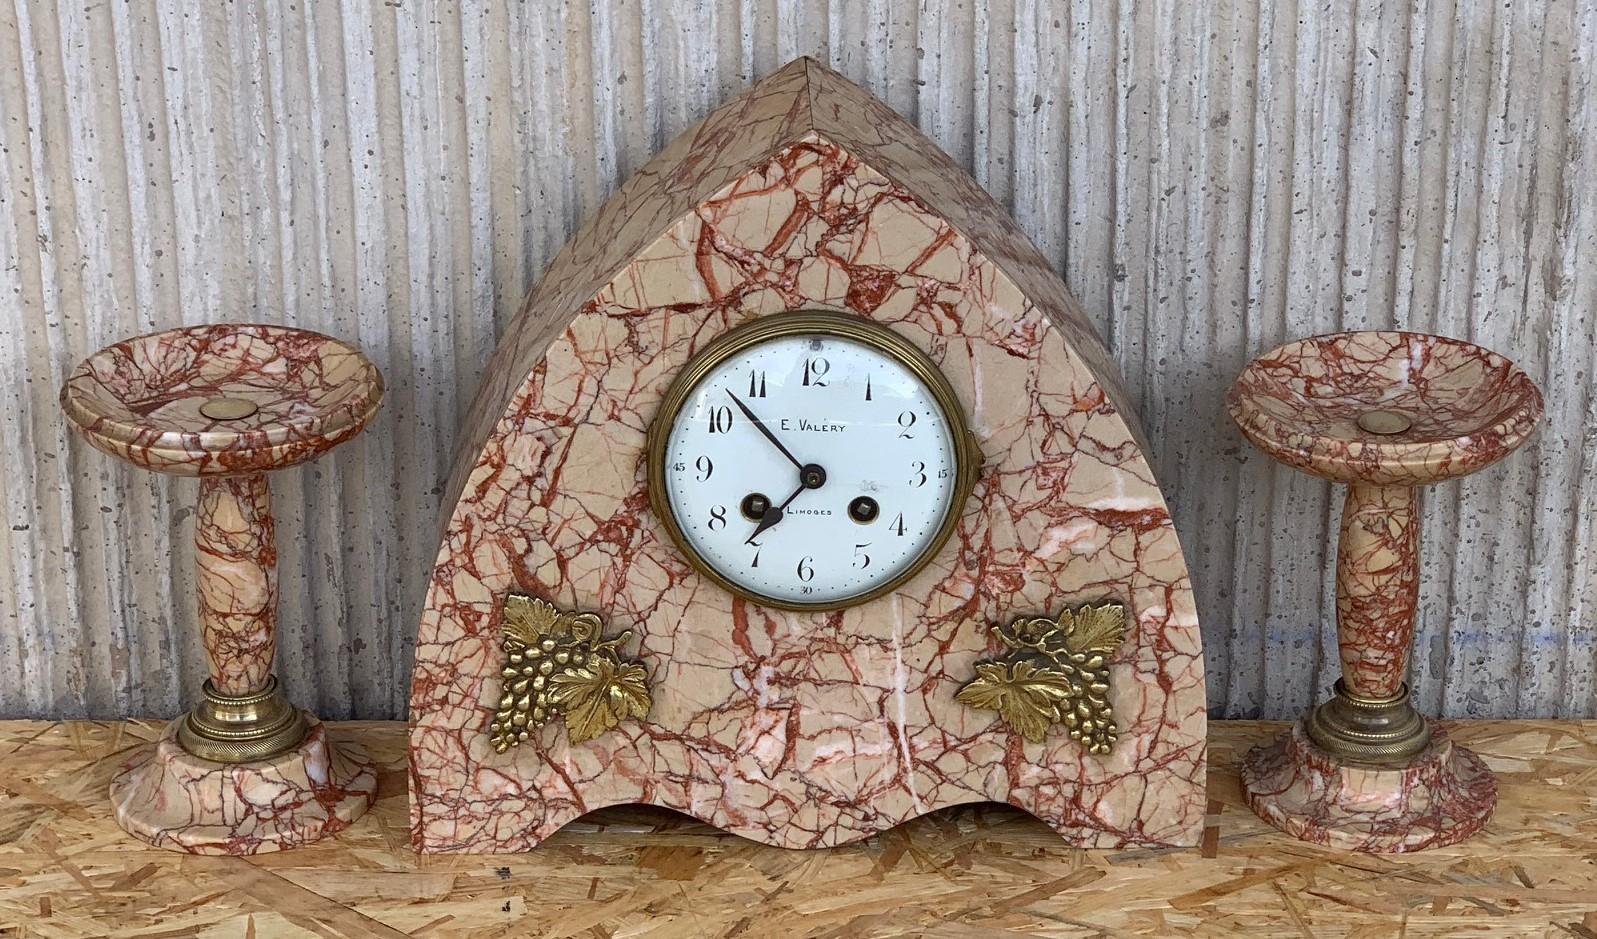 Art Deco pink marble mantle, desk or chapel clock with bronze details

Beautiful design and perfectly working Art Deco clock with a chime.

If you are looking for a great shape and excellent condition clock then this original specimen from the